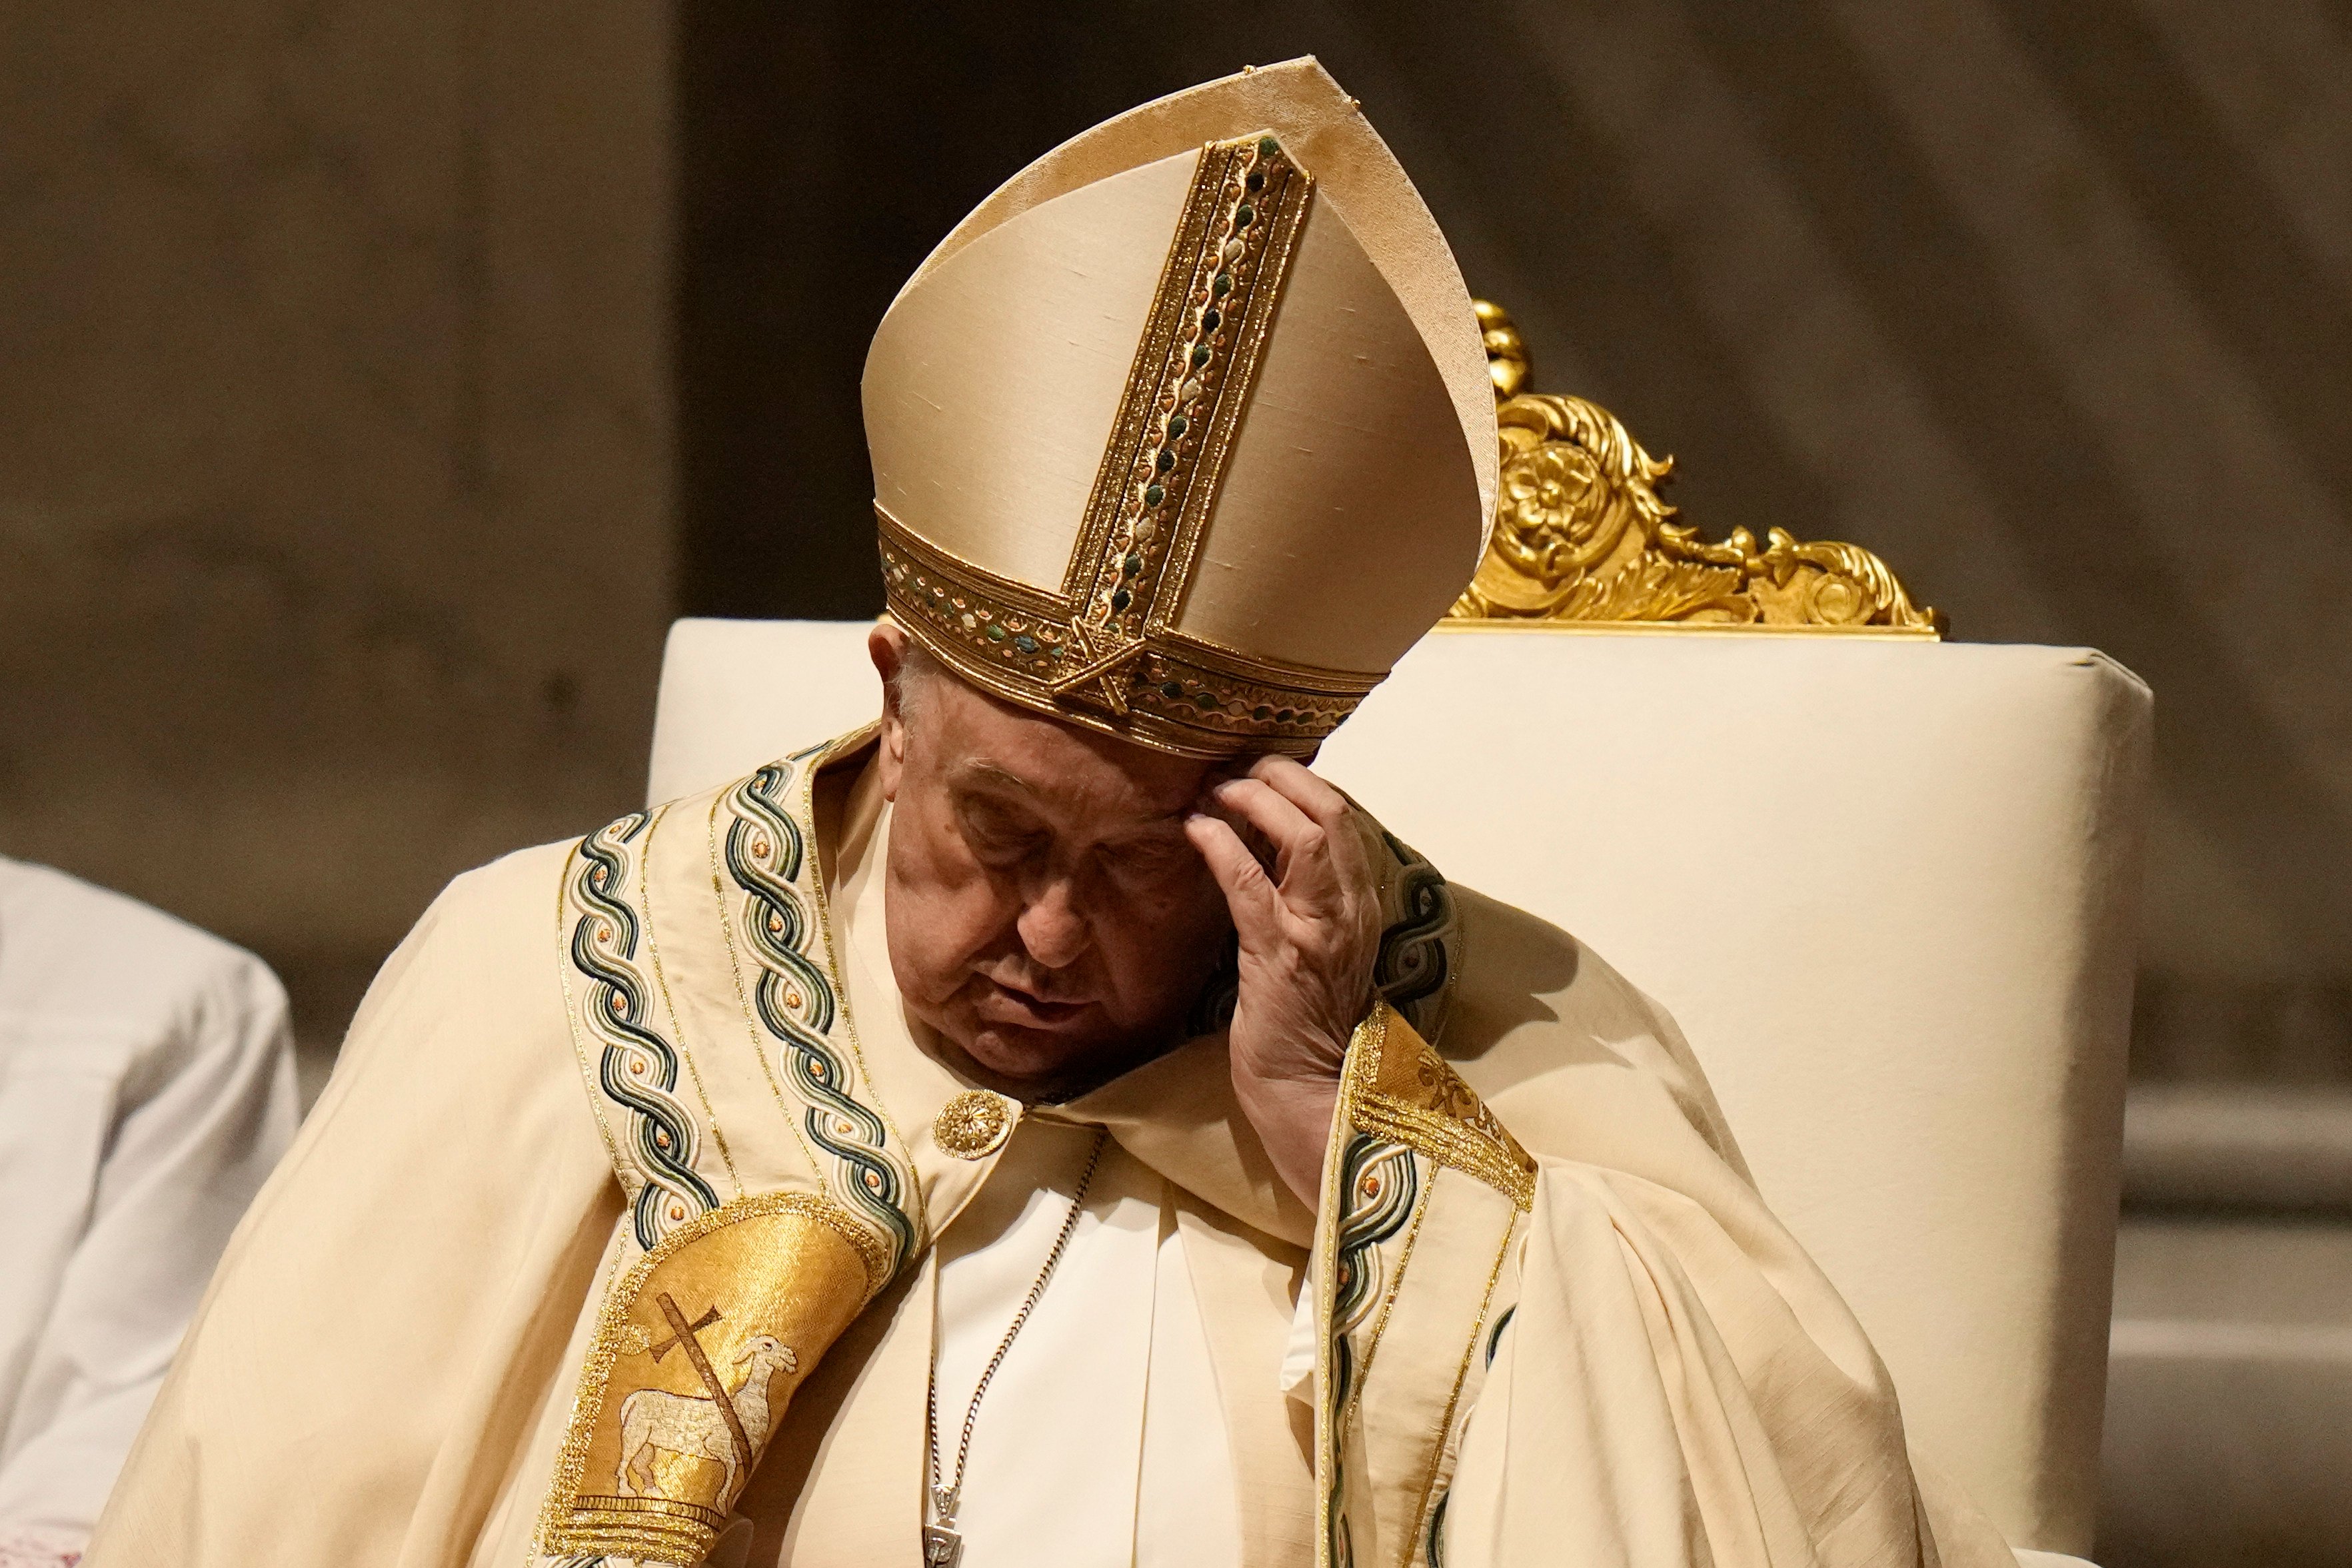 Pope Francis has presided this weekend over Easter vigil celebrations at the Vatican. Photo: AP